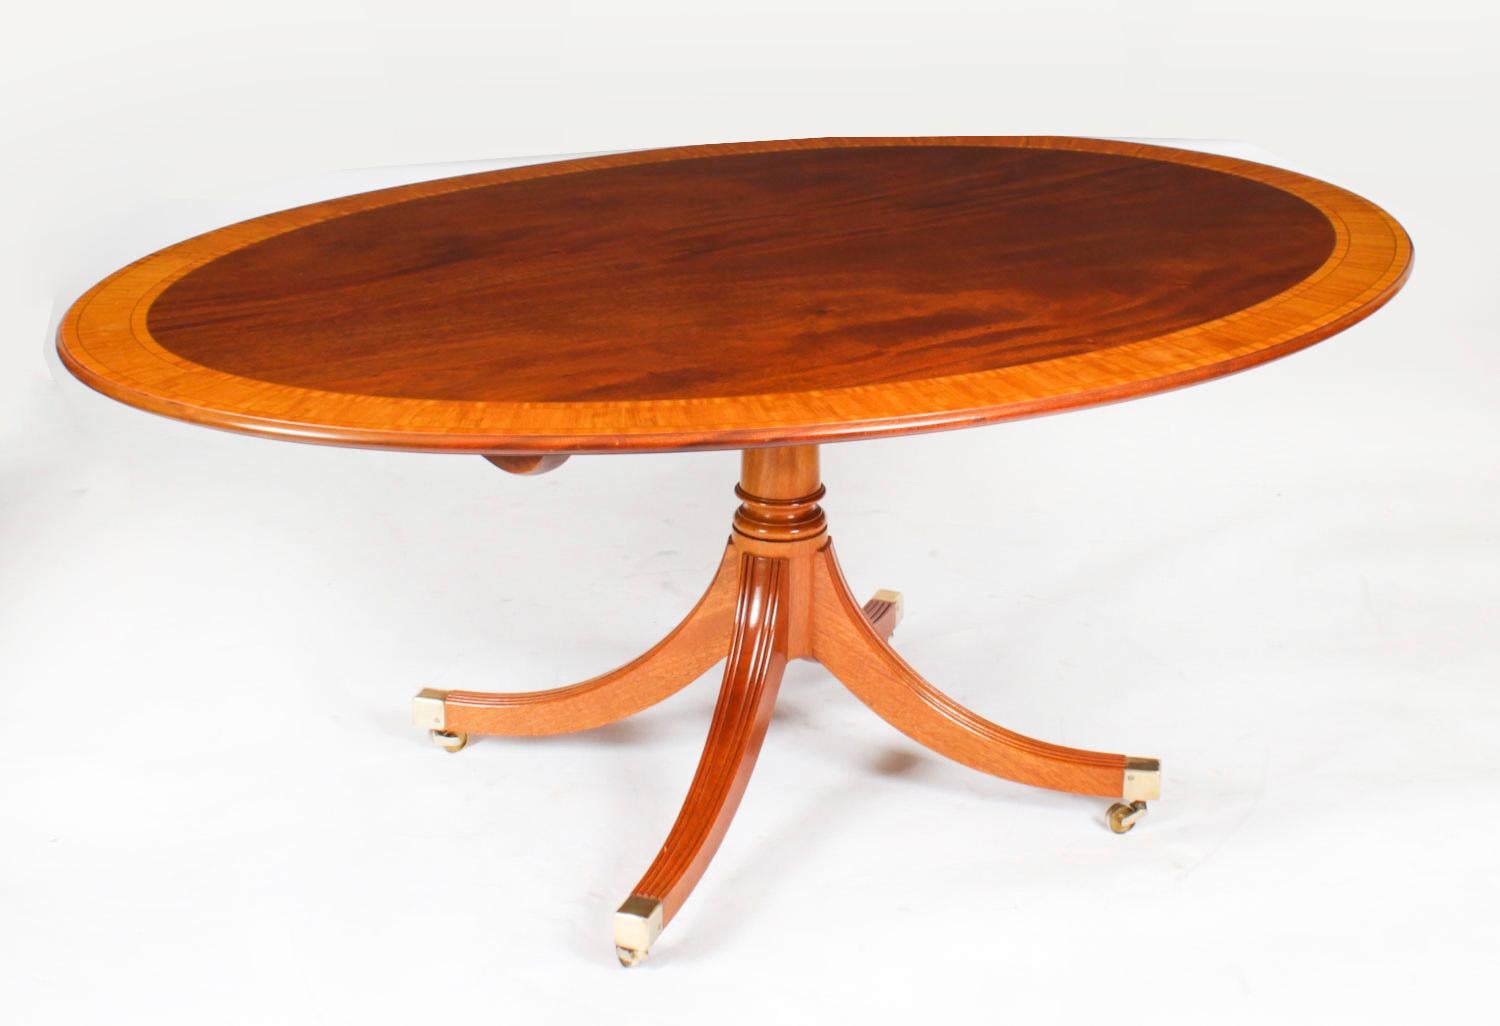 This is a beautiful Regency Revival flame mahogany and satinwood banded oval dining table dating from Circa 1980, made by the Master Cabinet maker William Tillman and bearing his label on the underside, with a matching set of six  Regency Revival